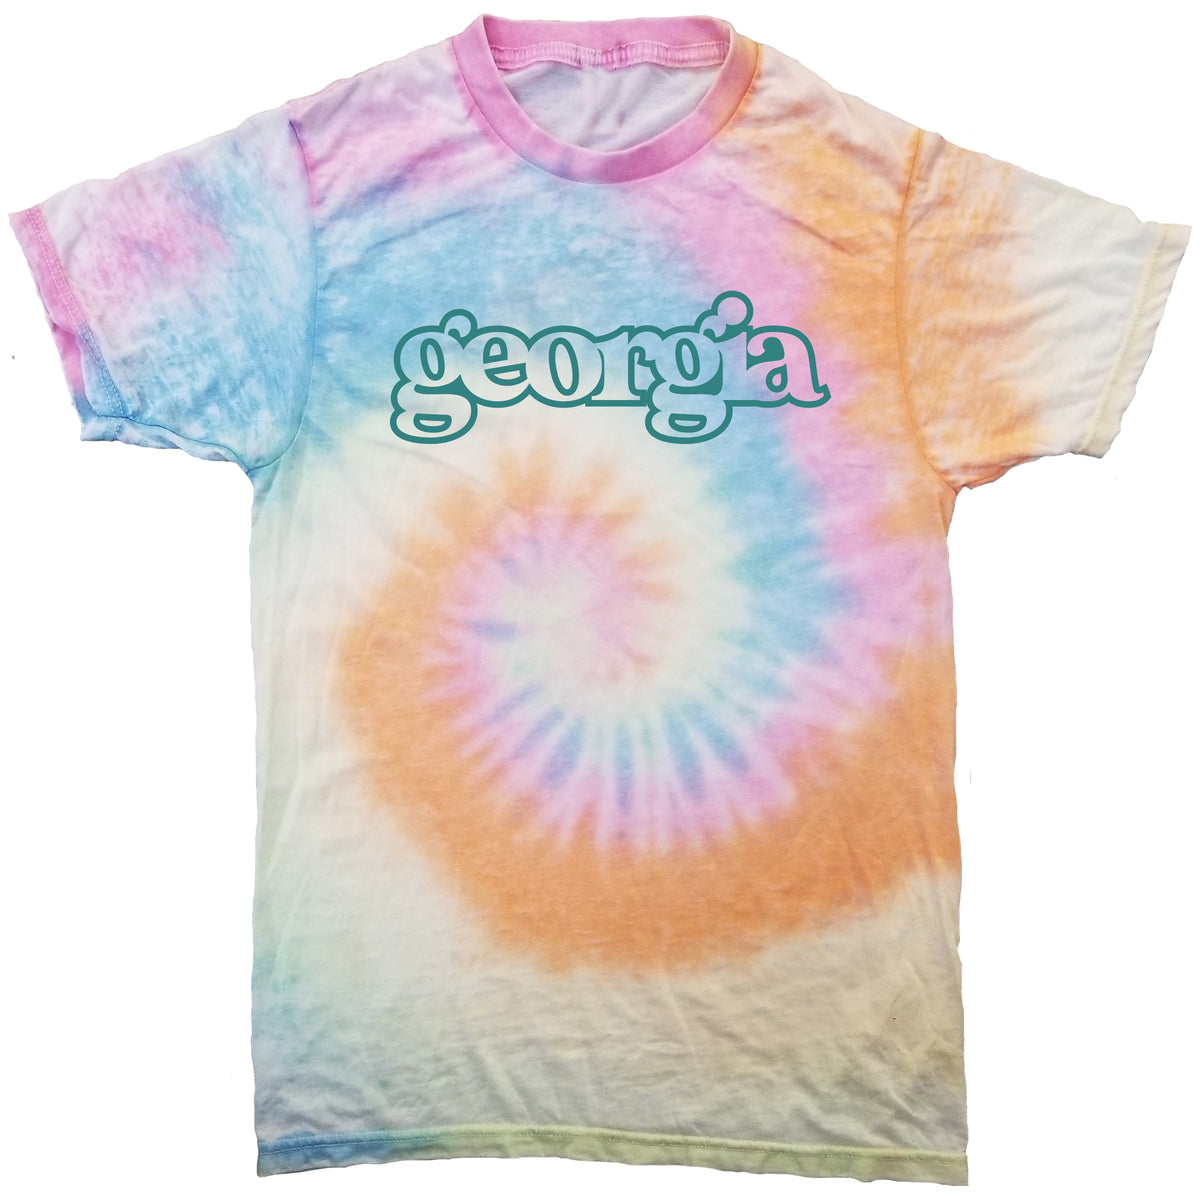 Stated Outfitters Georgia Pastel Tie-Dye T-Shirt Large